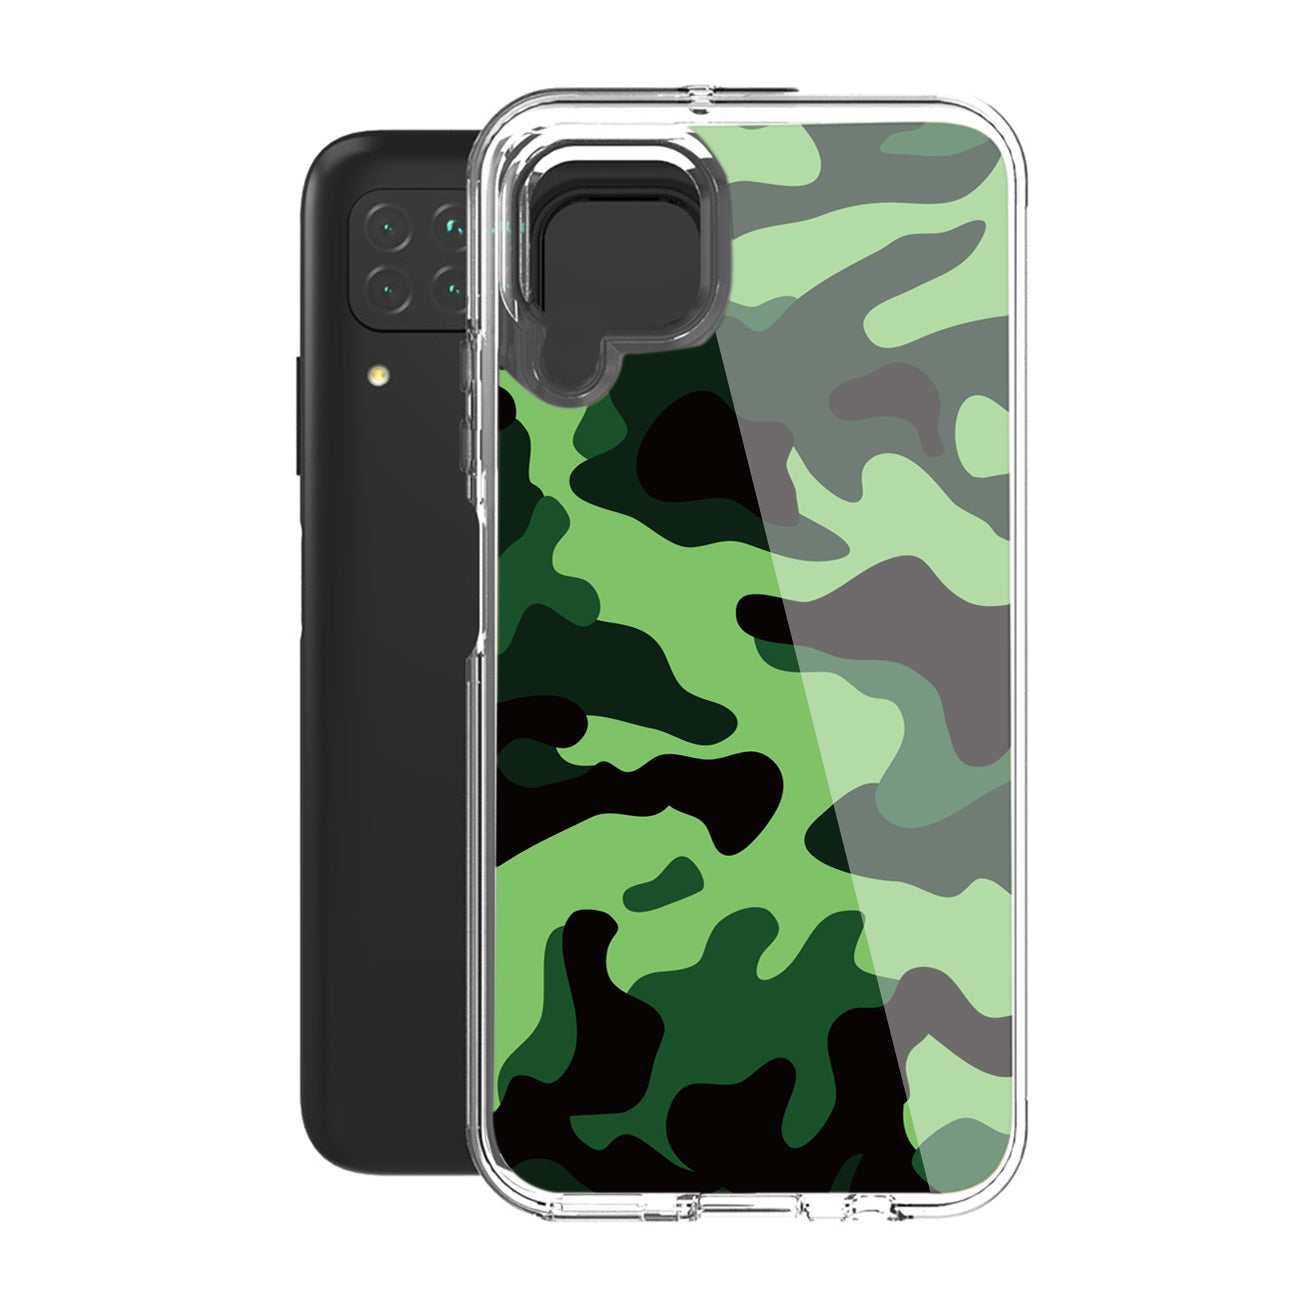 Camouflage Dual Layer Hybrid Hard & Soft TPU Rubber Case for SAMS GALAXY A12 5G In Mint Green